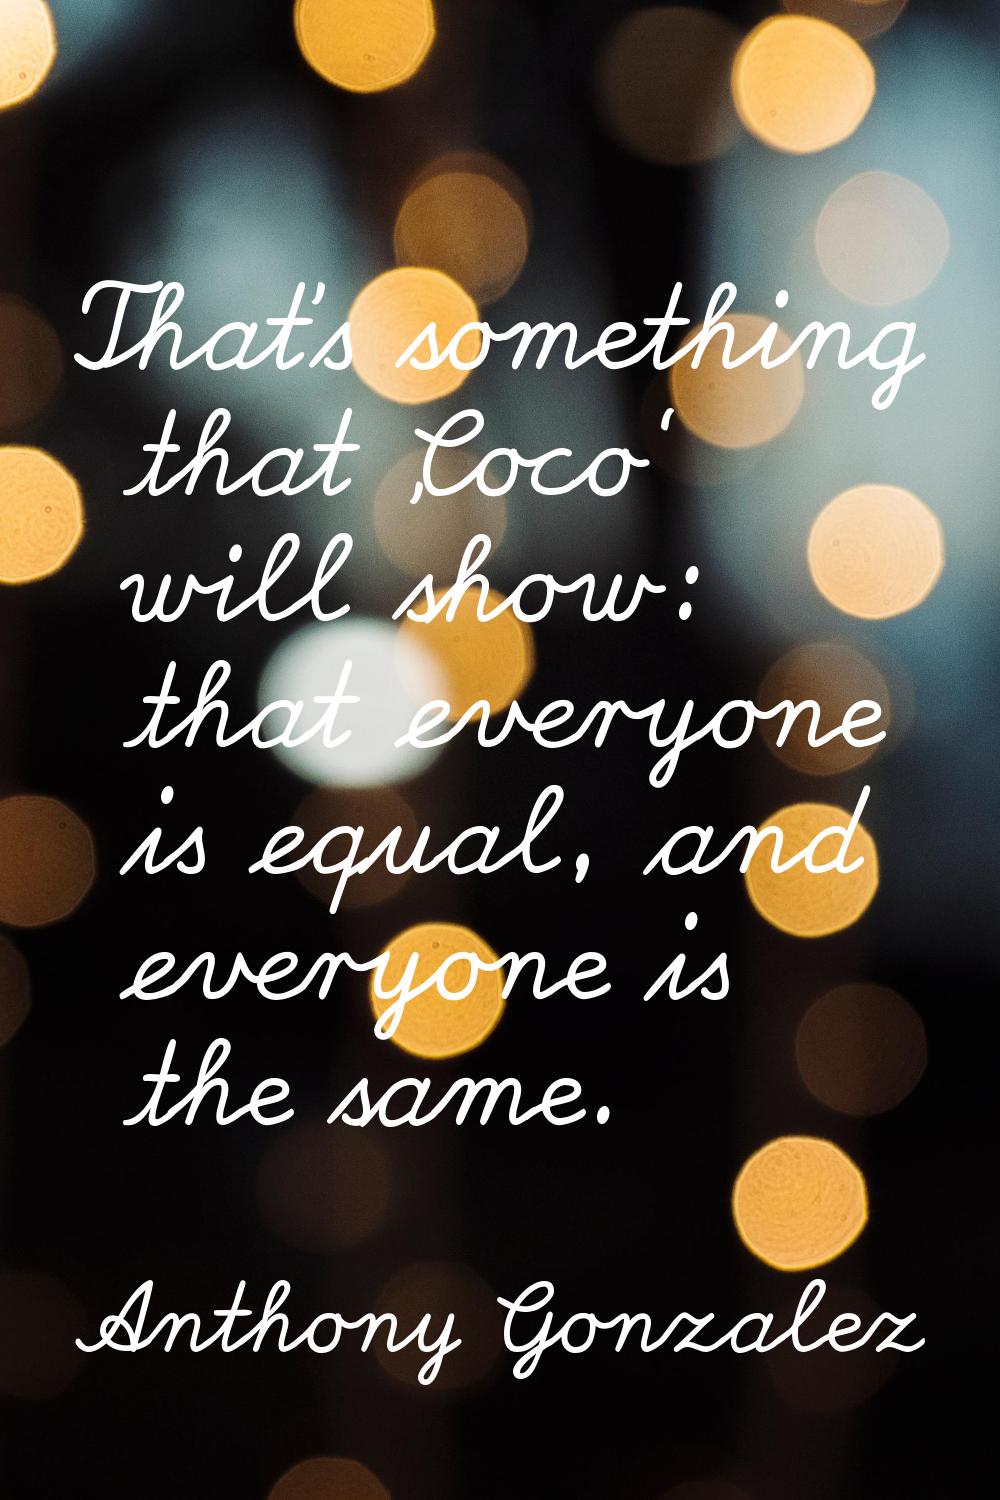 That's something that 'Coco' will show: that everyone is equal, and everyone is the same.